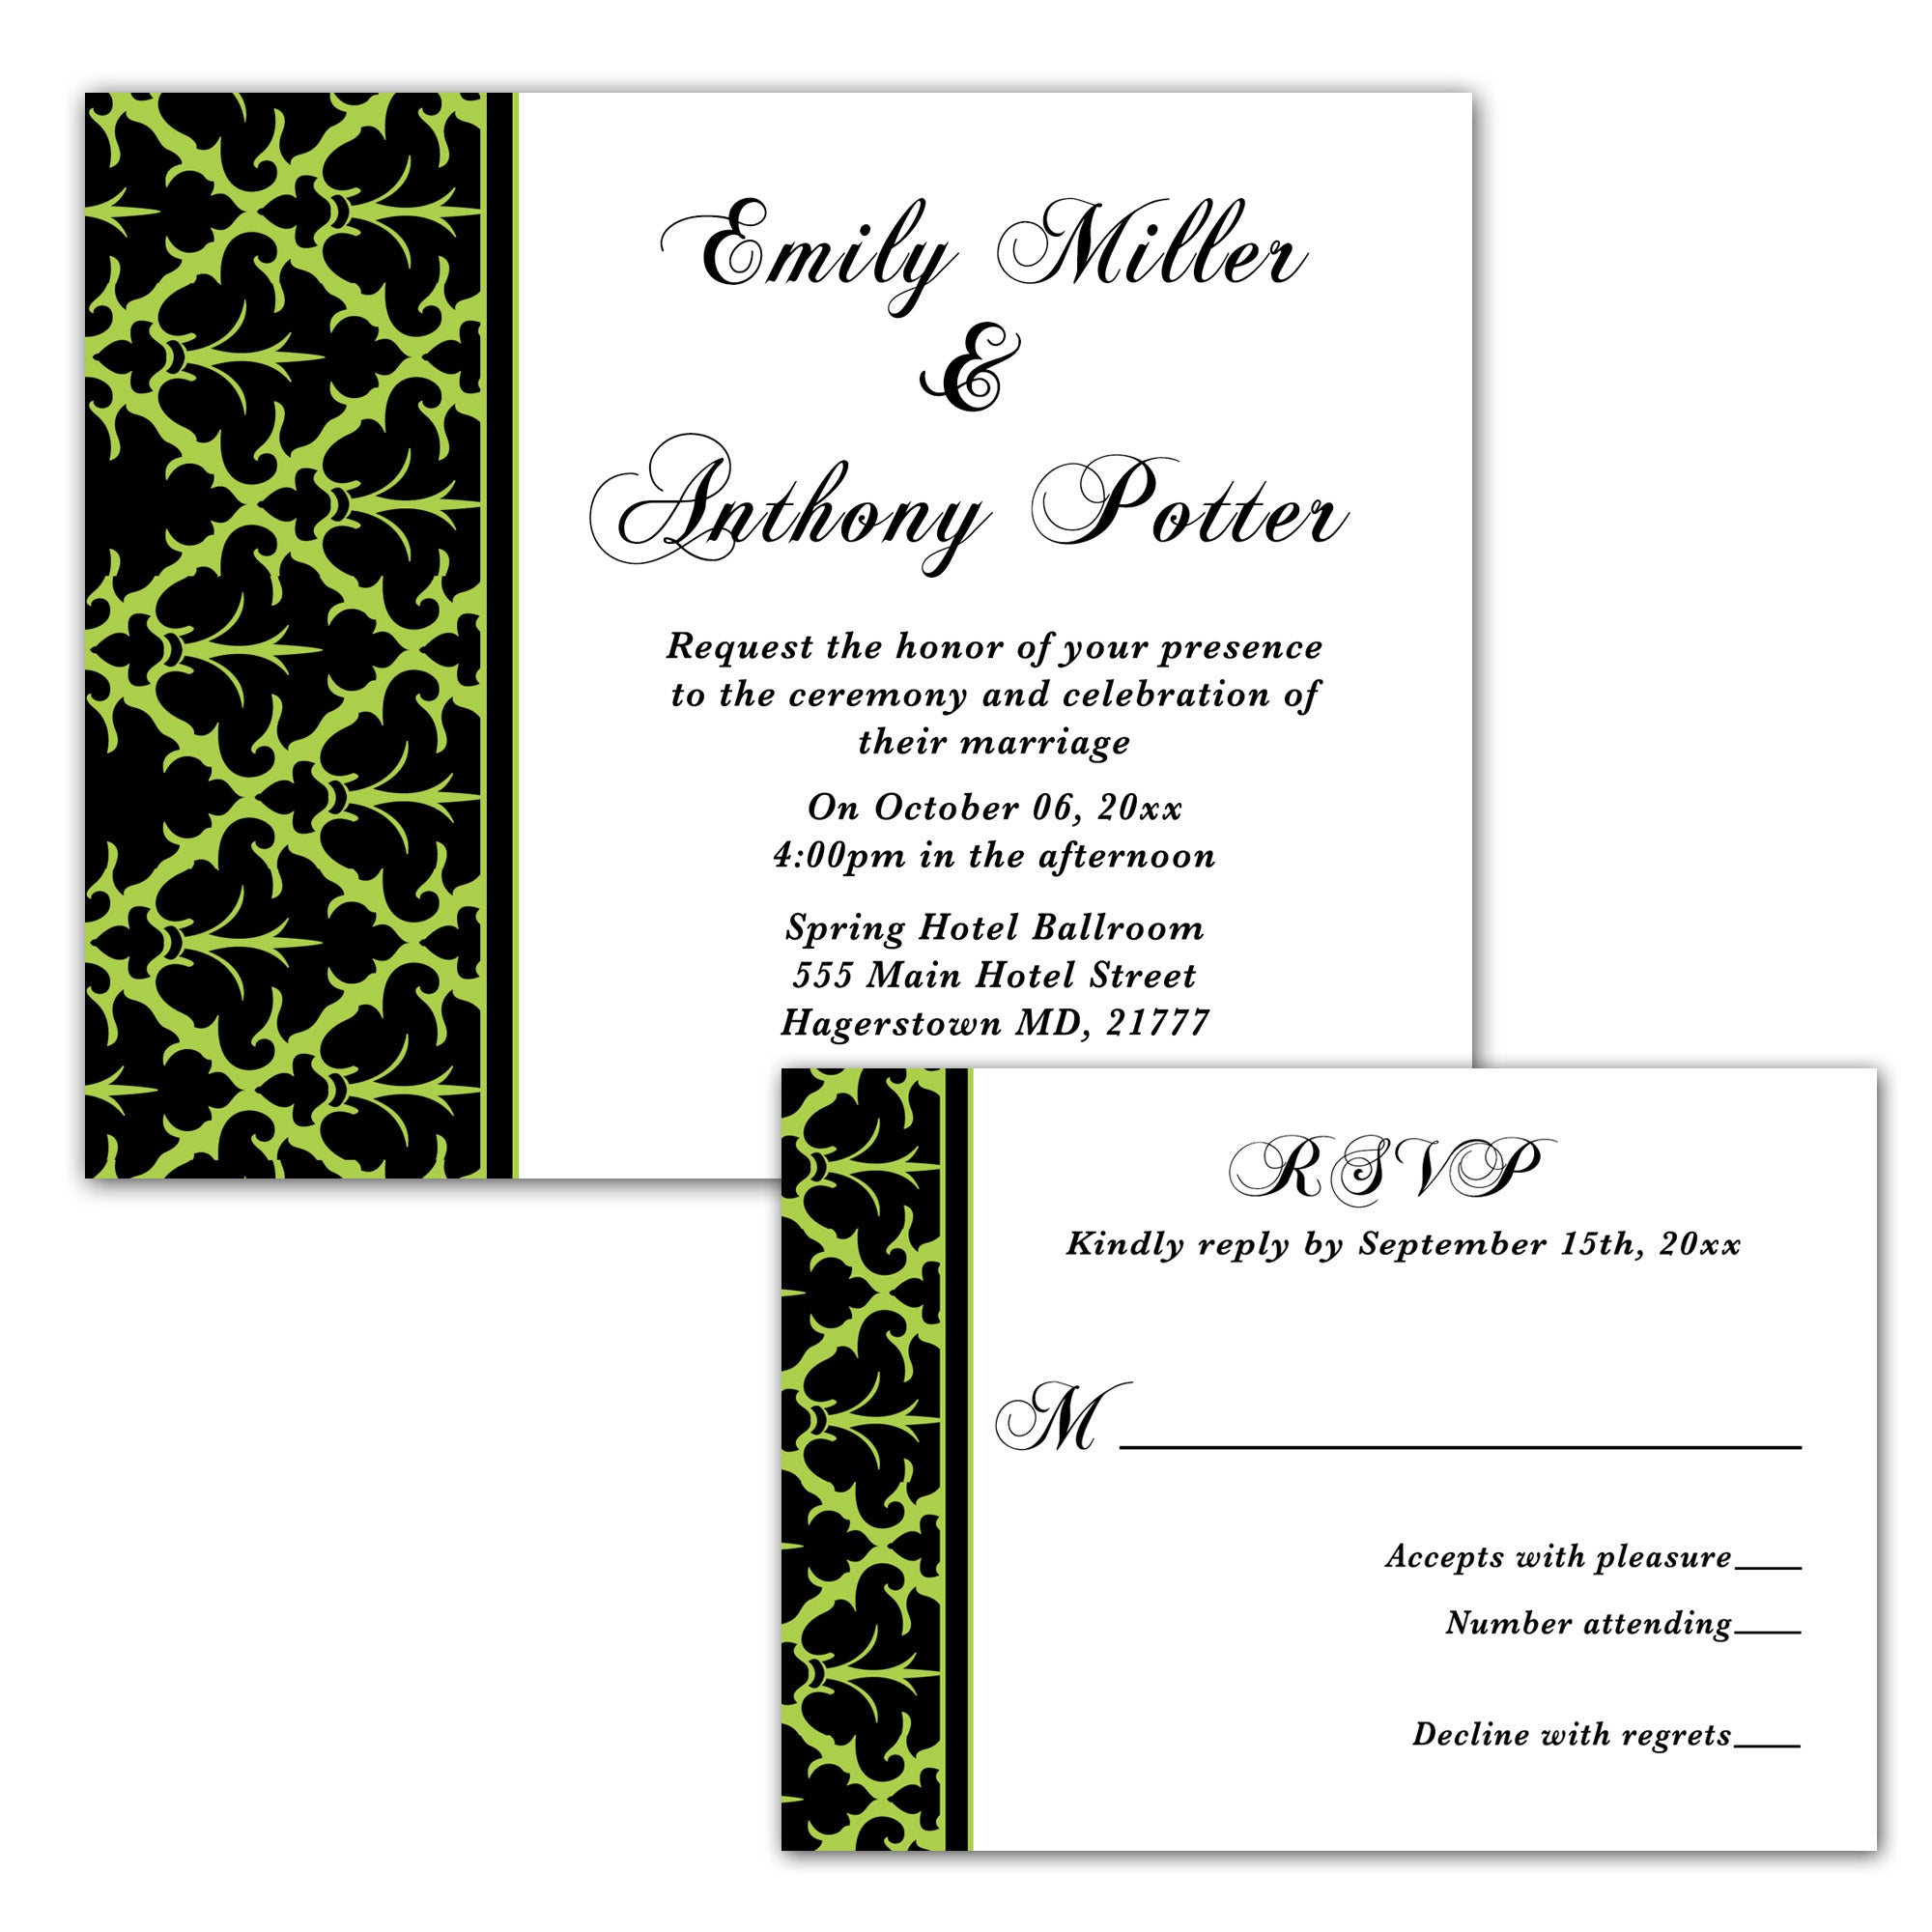 Pale Green 5x7 Cardstock For Invitations 